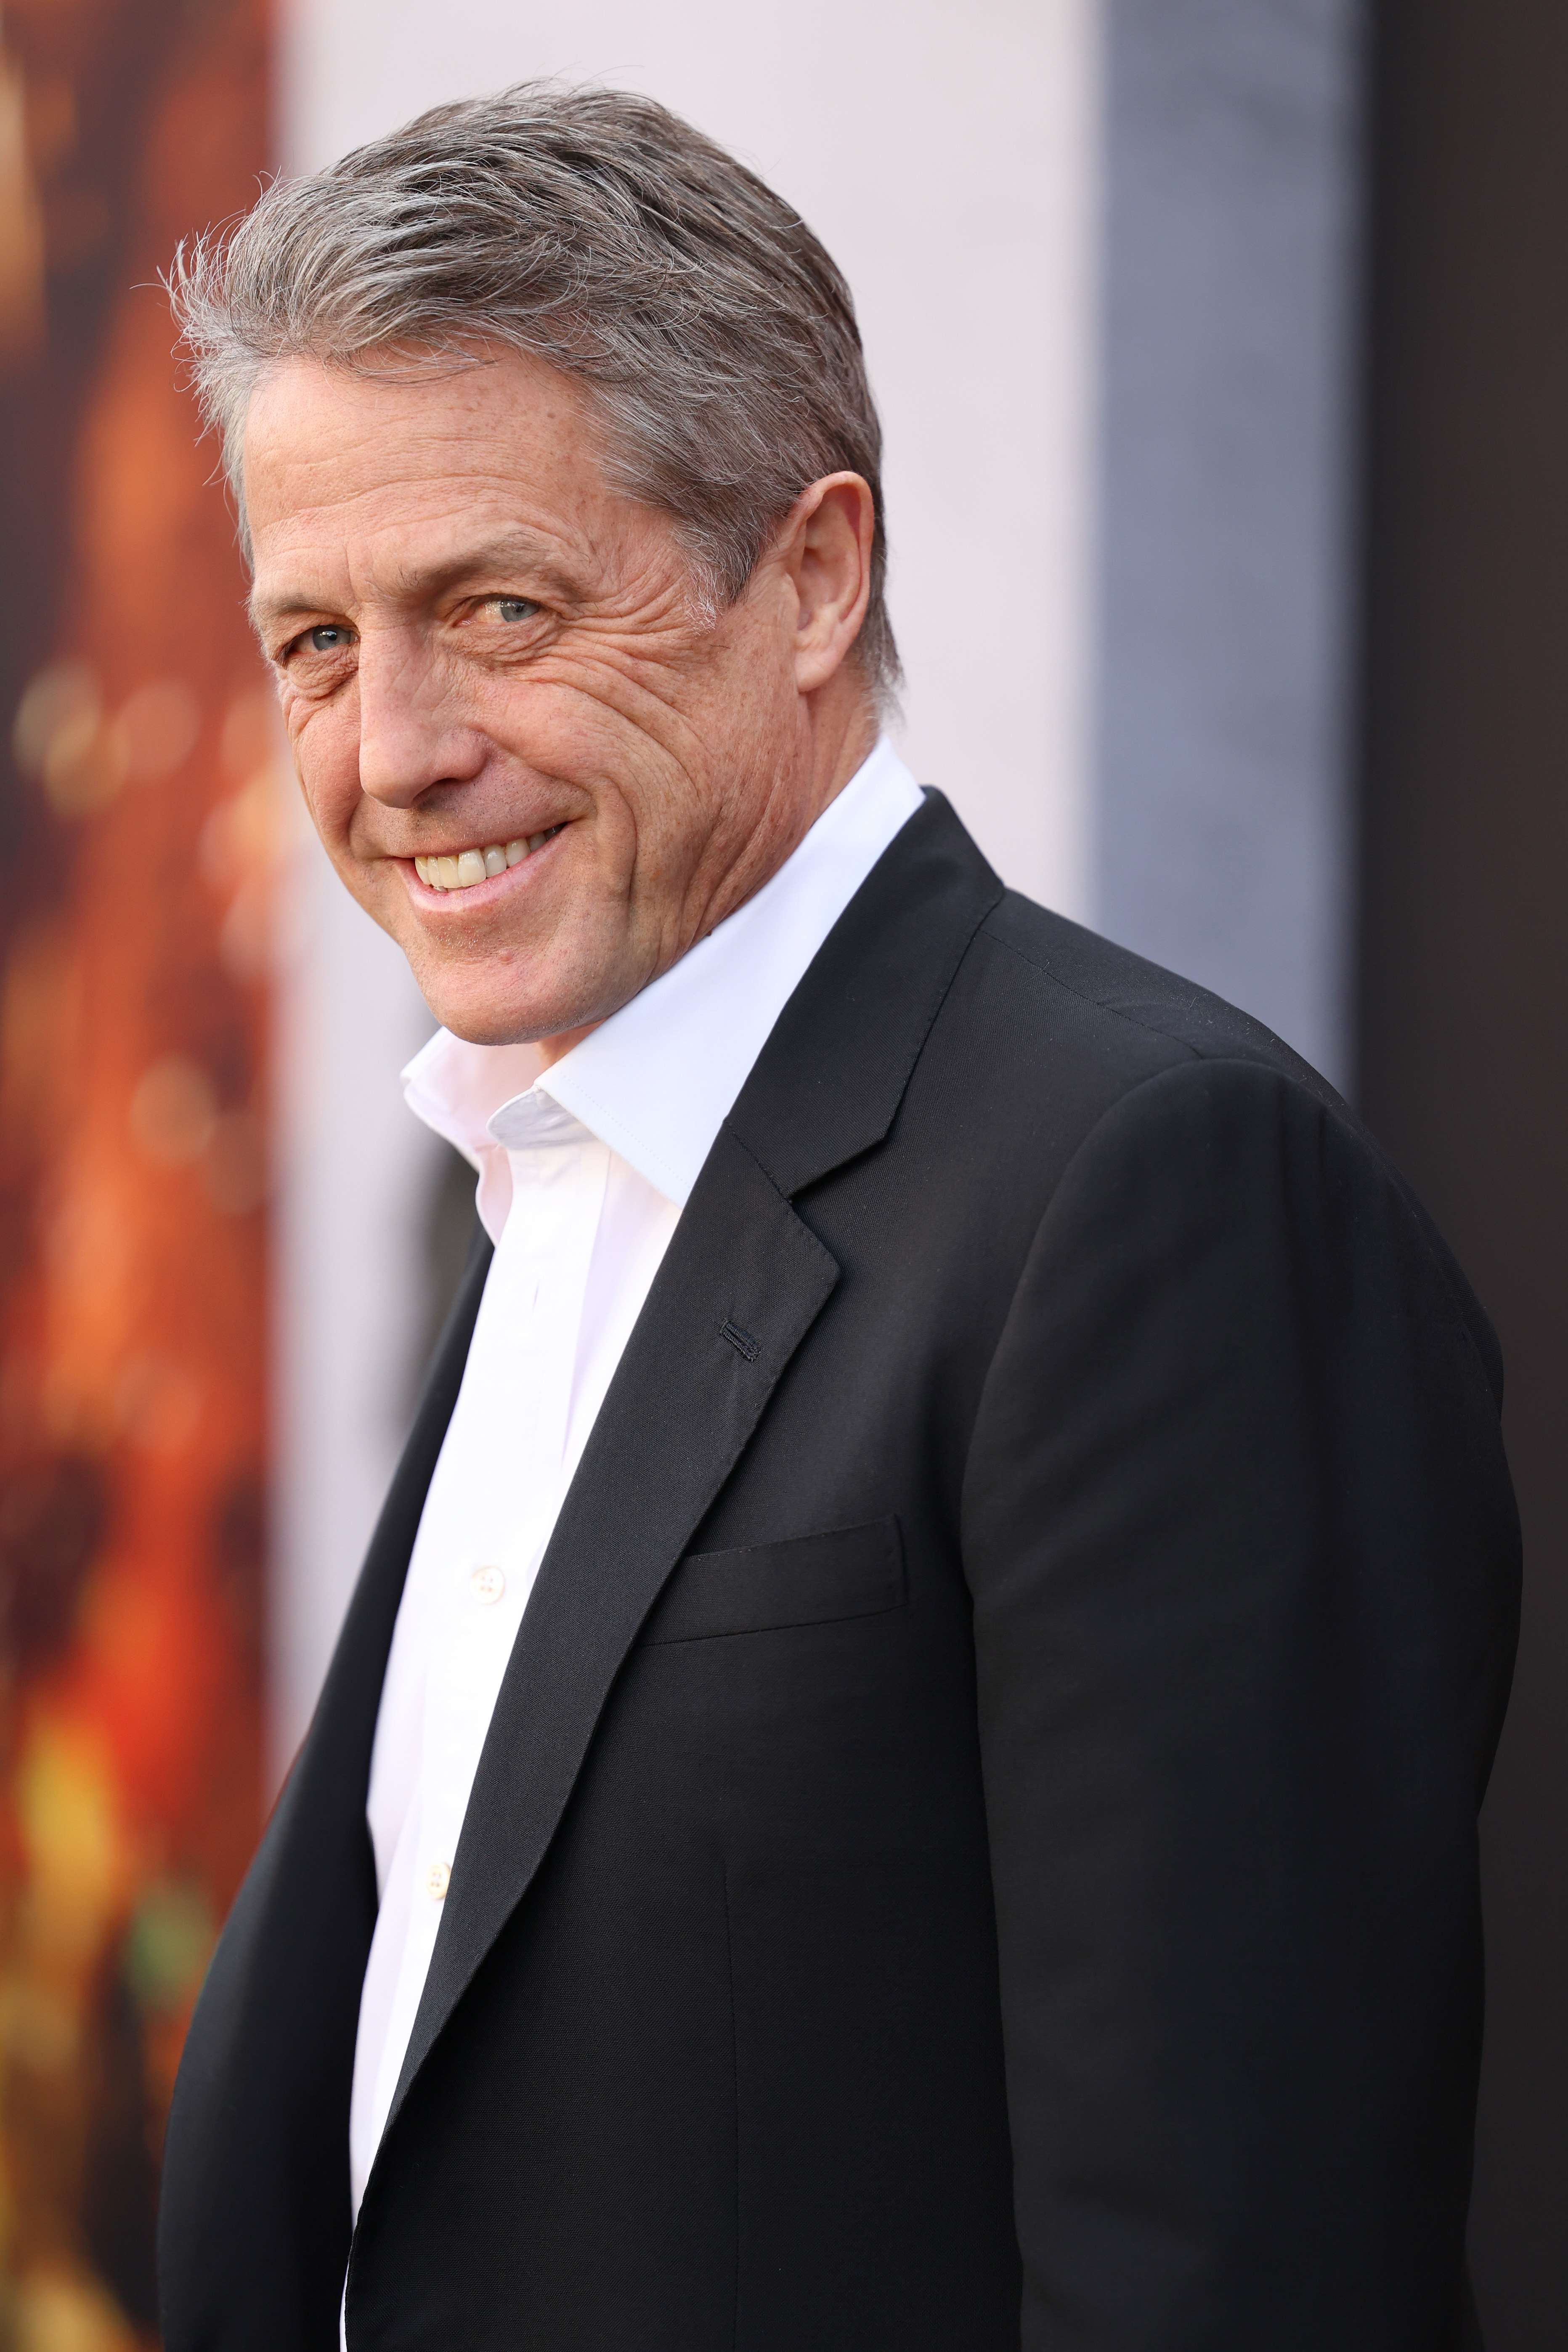 Hugh Grant smiles while wearing a black suit jacket over a white shirt